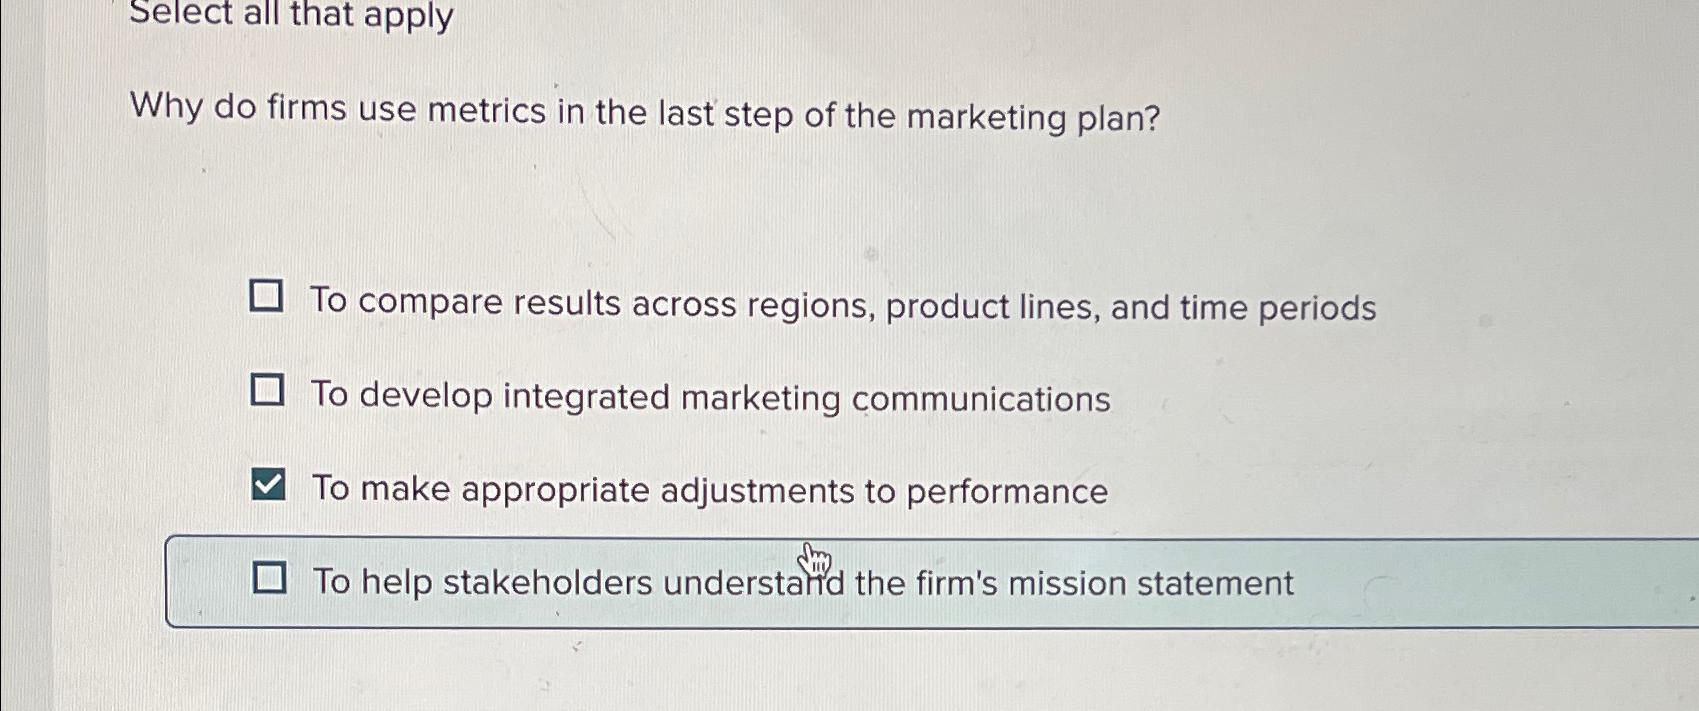 Why Do Firms Use Metrics in the Last Step of the Marketing Plan?  